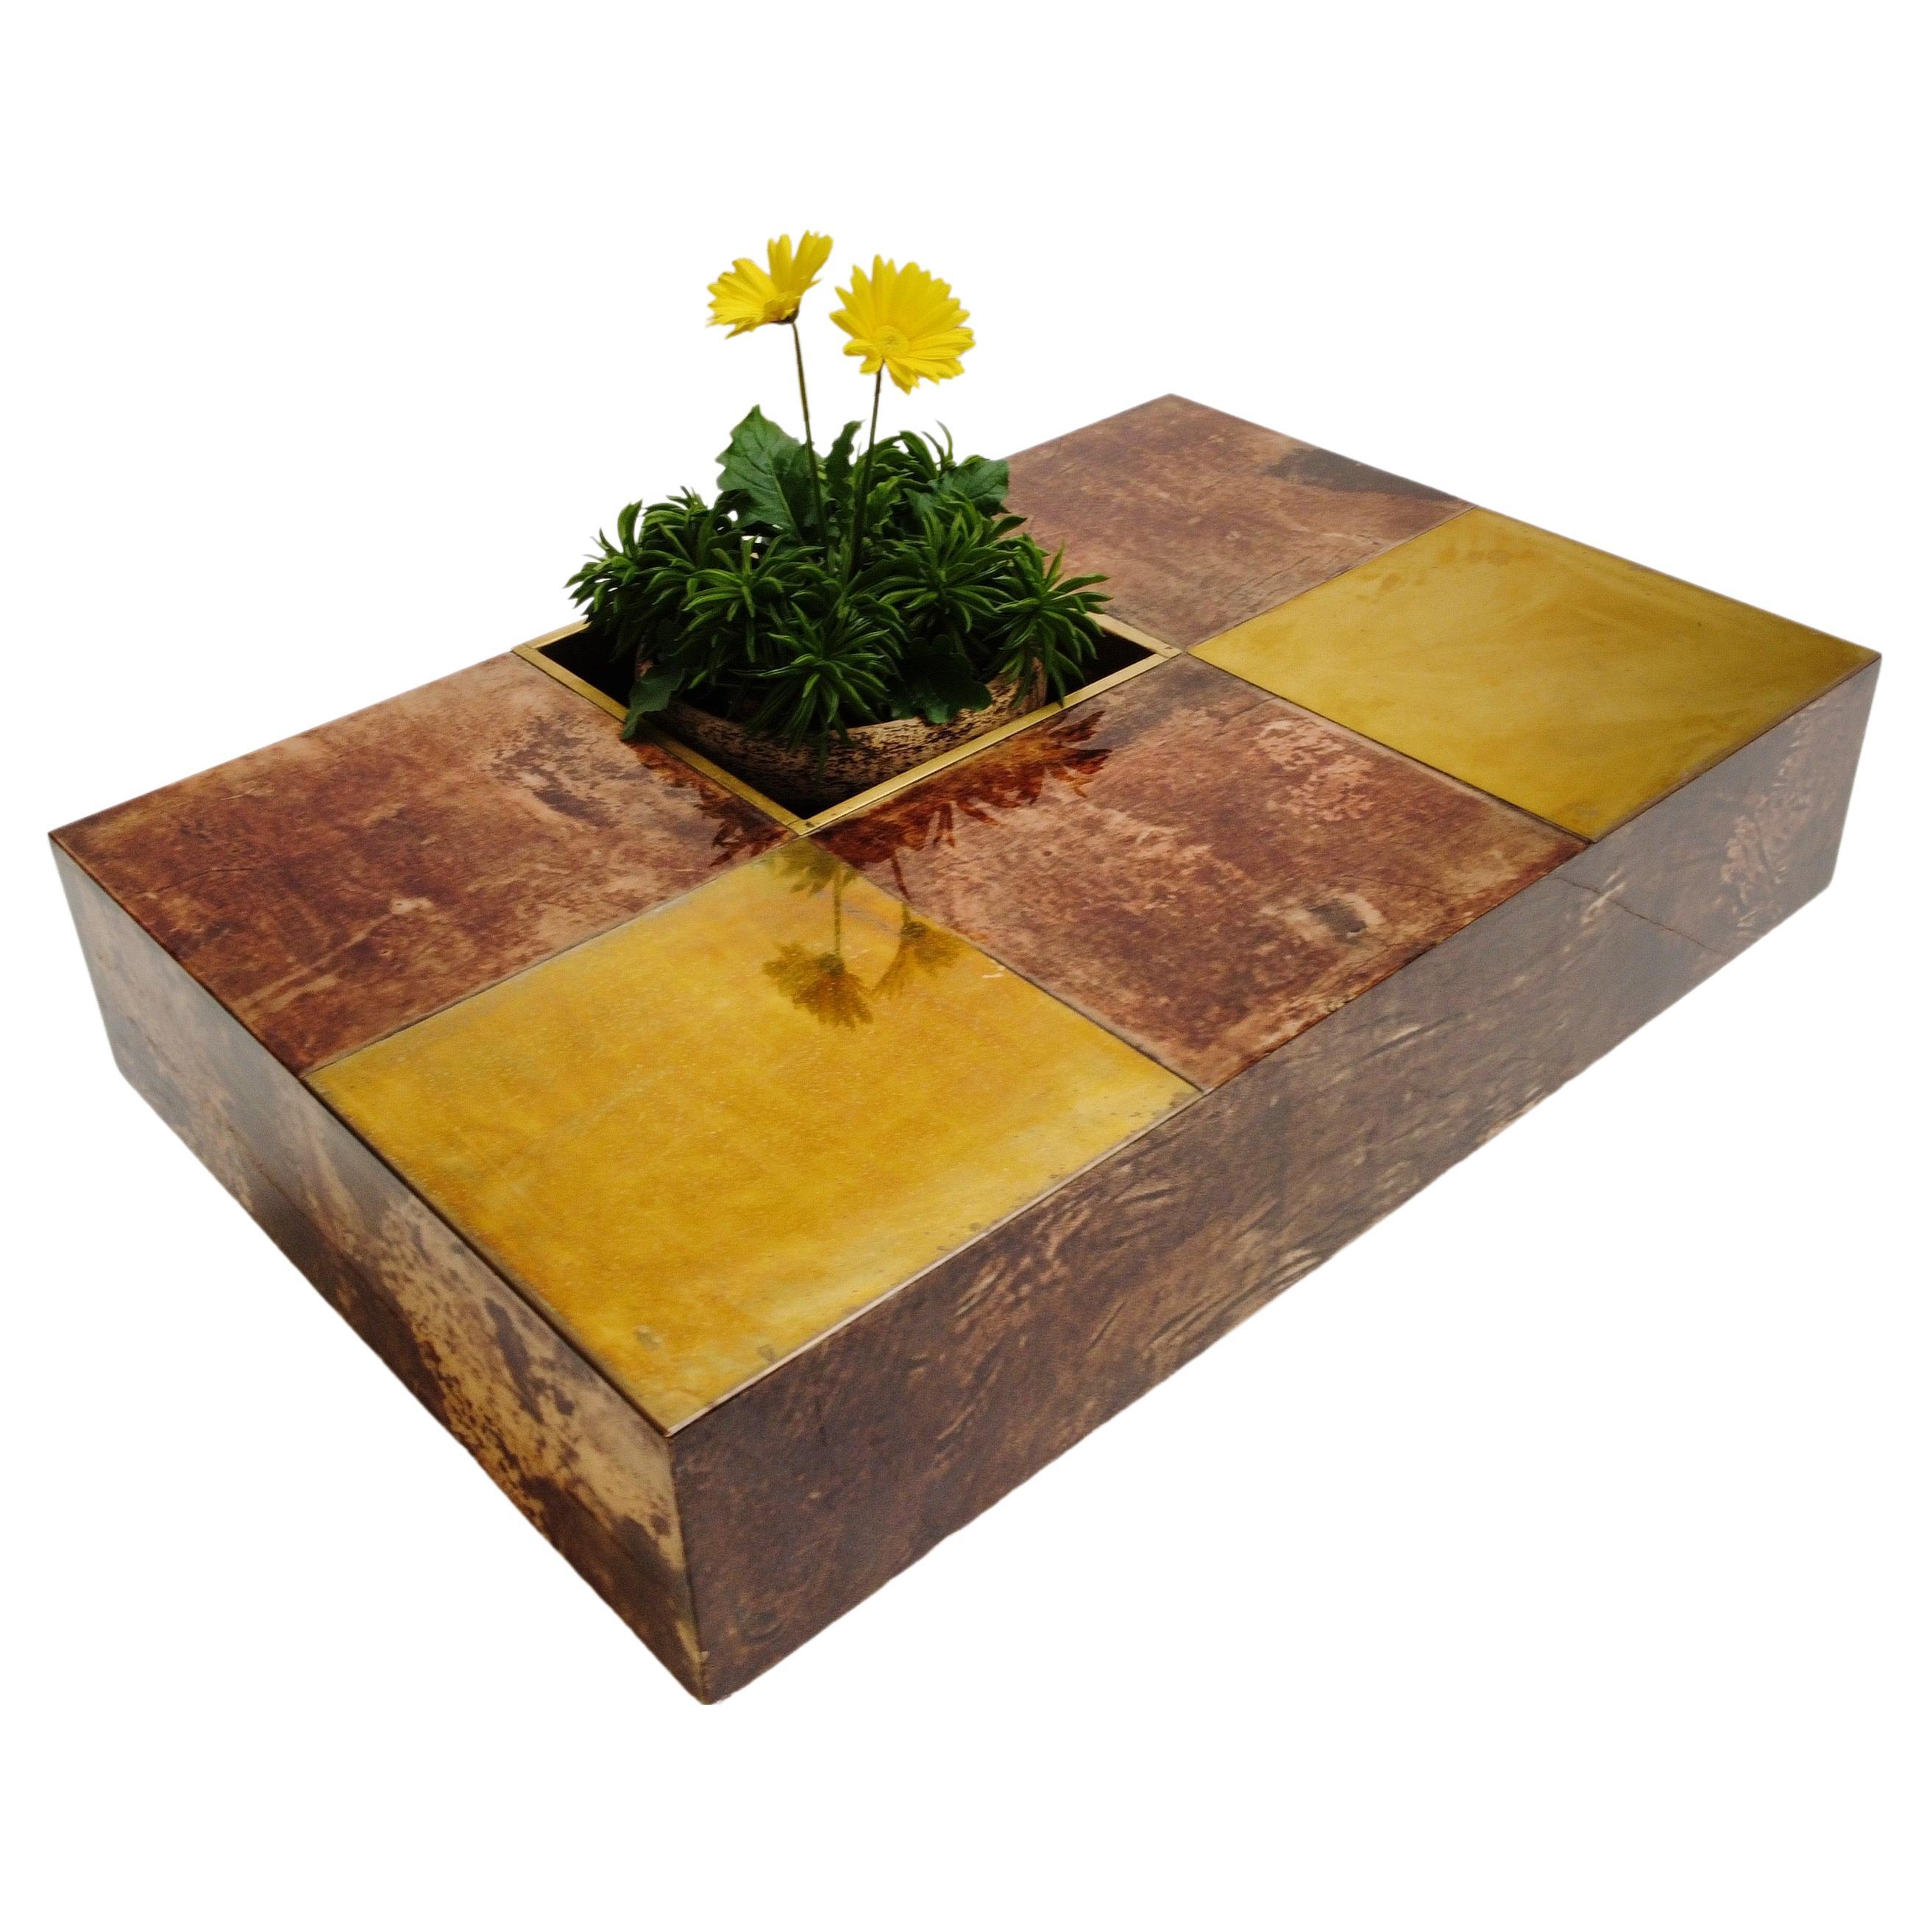 Rare and Unique Aldo Tura Goatskin Coffee Table with Brass Planter Italy 1960's For Sale